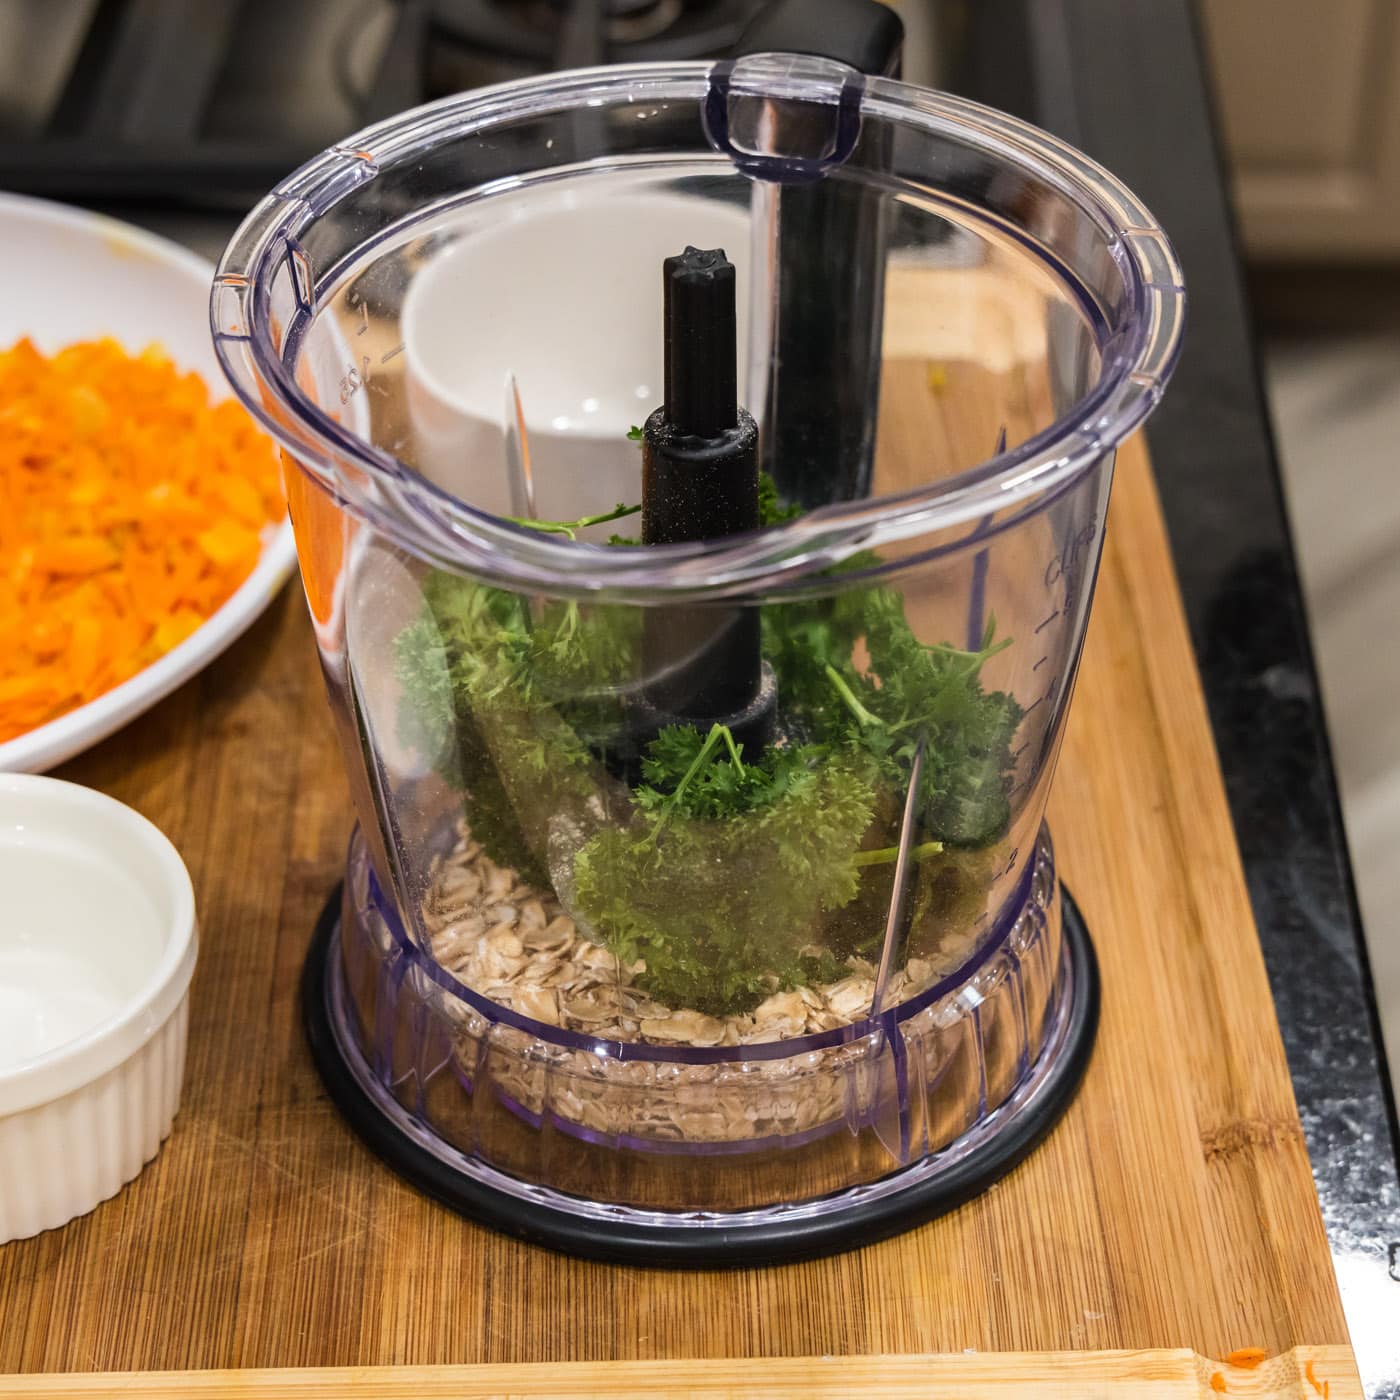 oats and parsley in a food processor